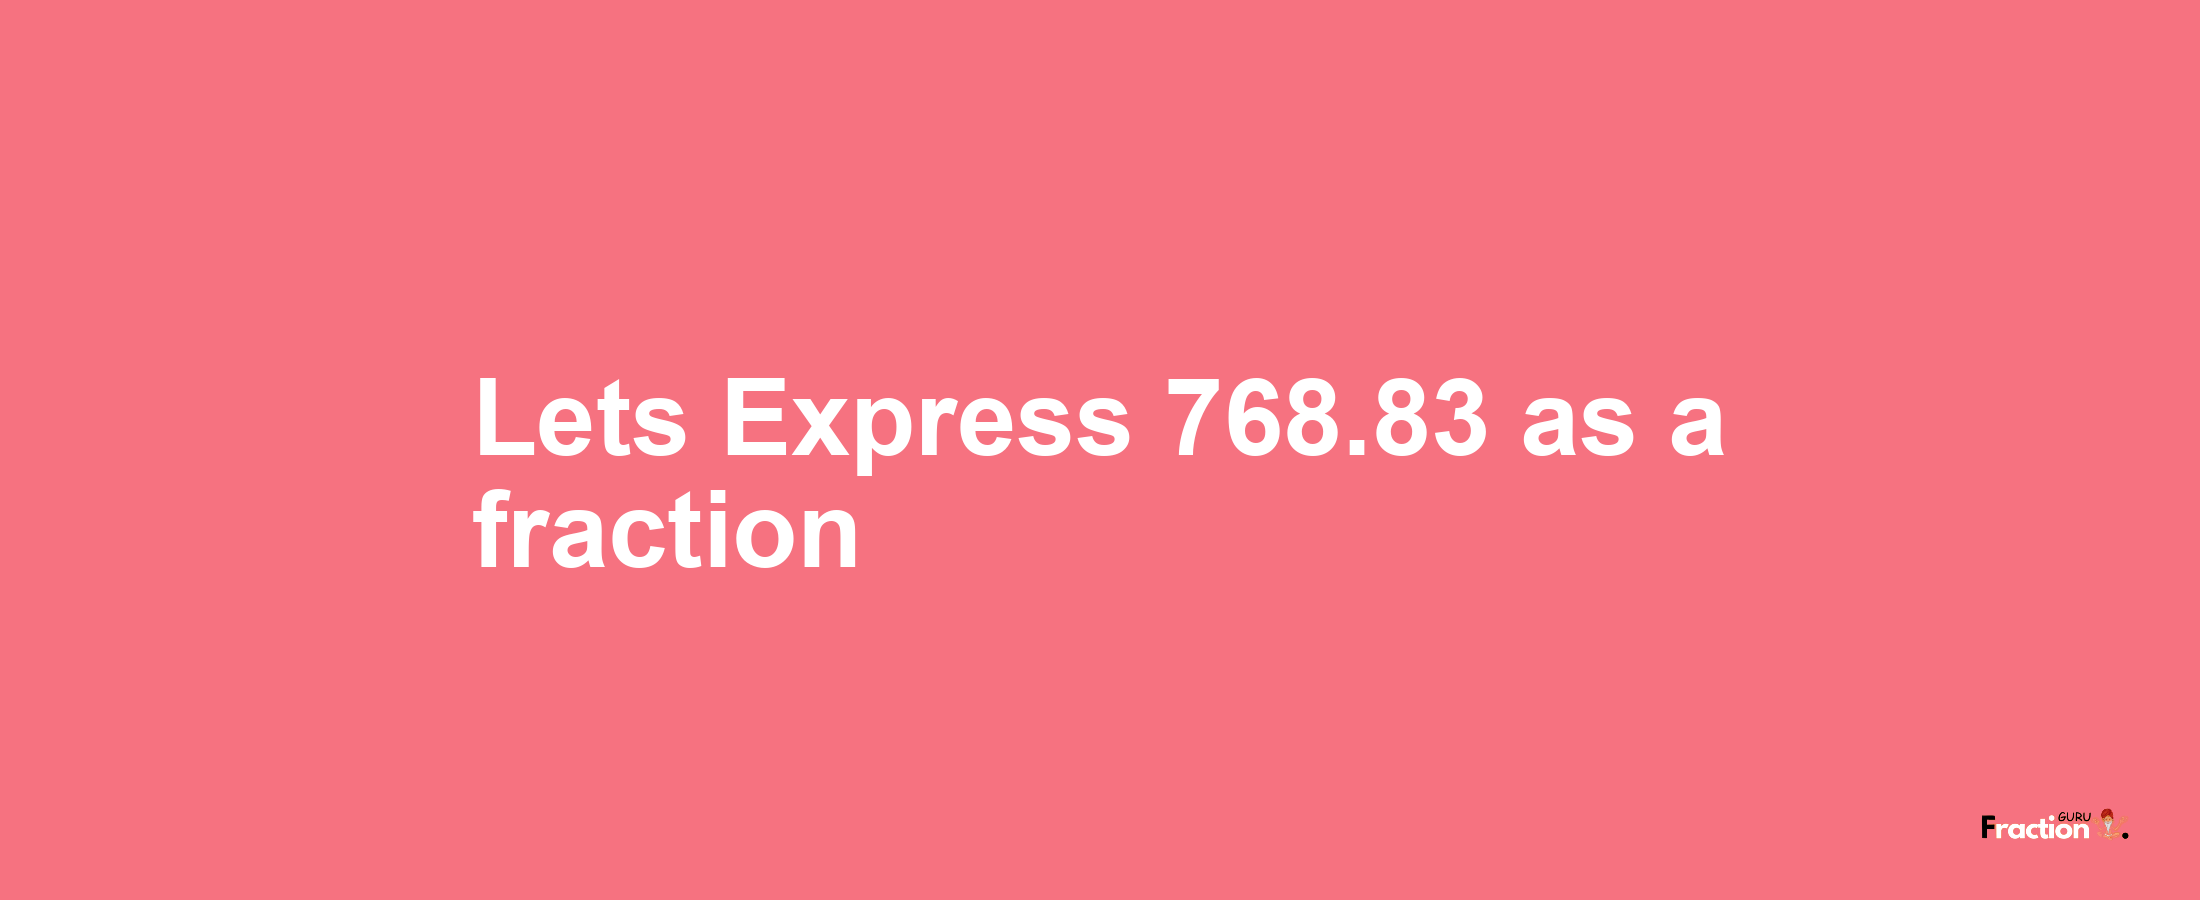 Lets Express 768.83 as afraction